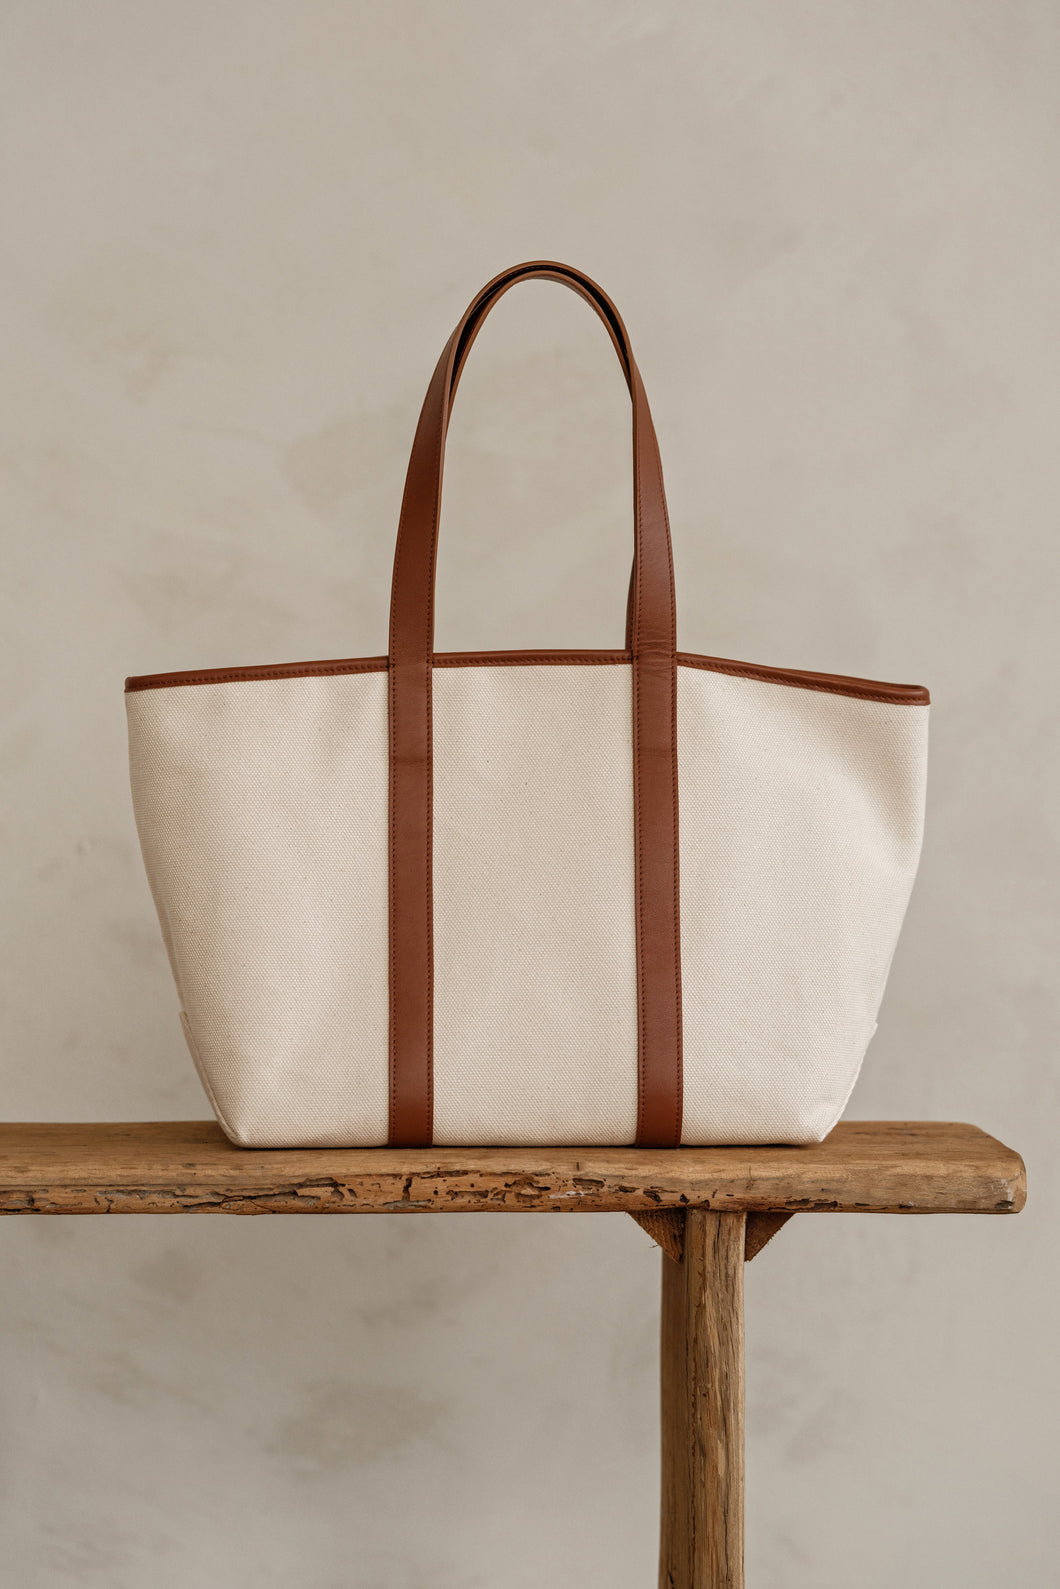 The Structured Tote Bag Luxury Canvas and Leather Work Bag INK + PORCELAIN x Dāl the Label